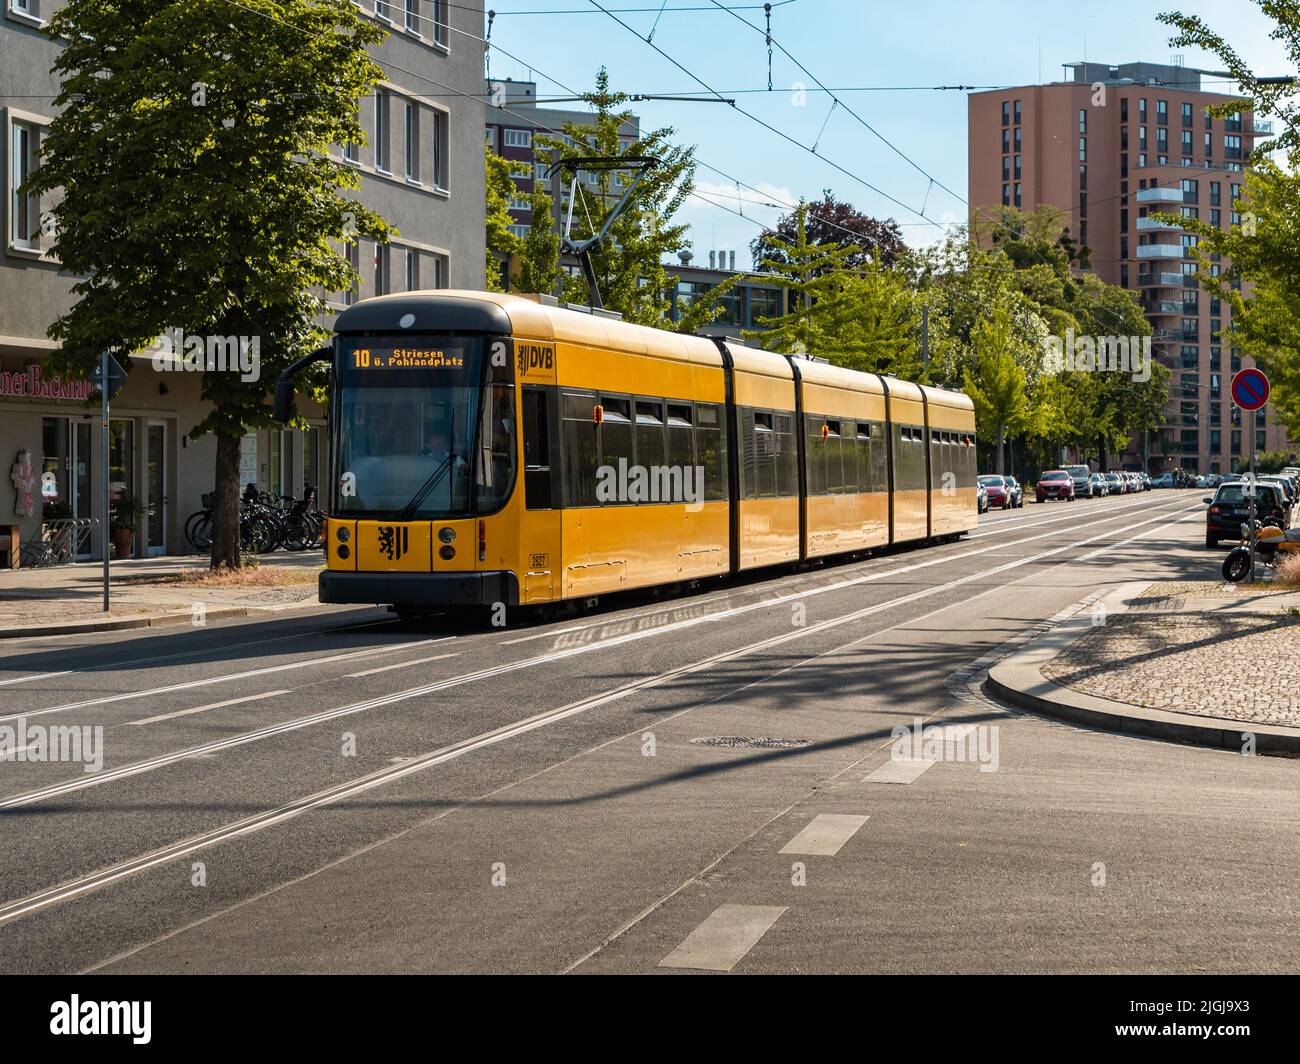 Tram of the DVB in the city. Empty street with a yellow cable car in Saxony. Public transportation on rails. Vehicle of the Dresdner Verkehrsbetriebe. Stock Photo